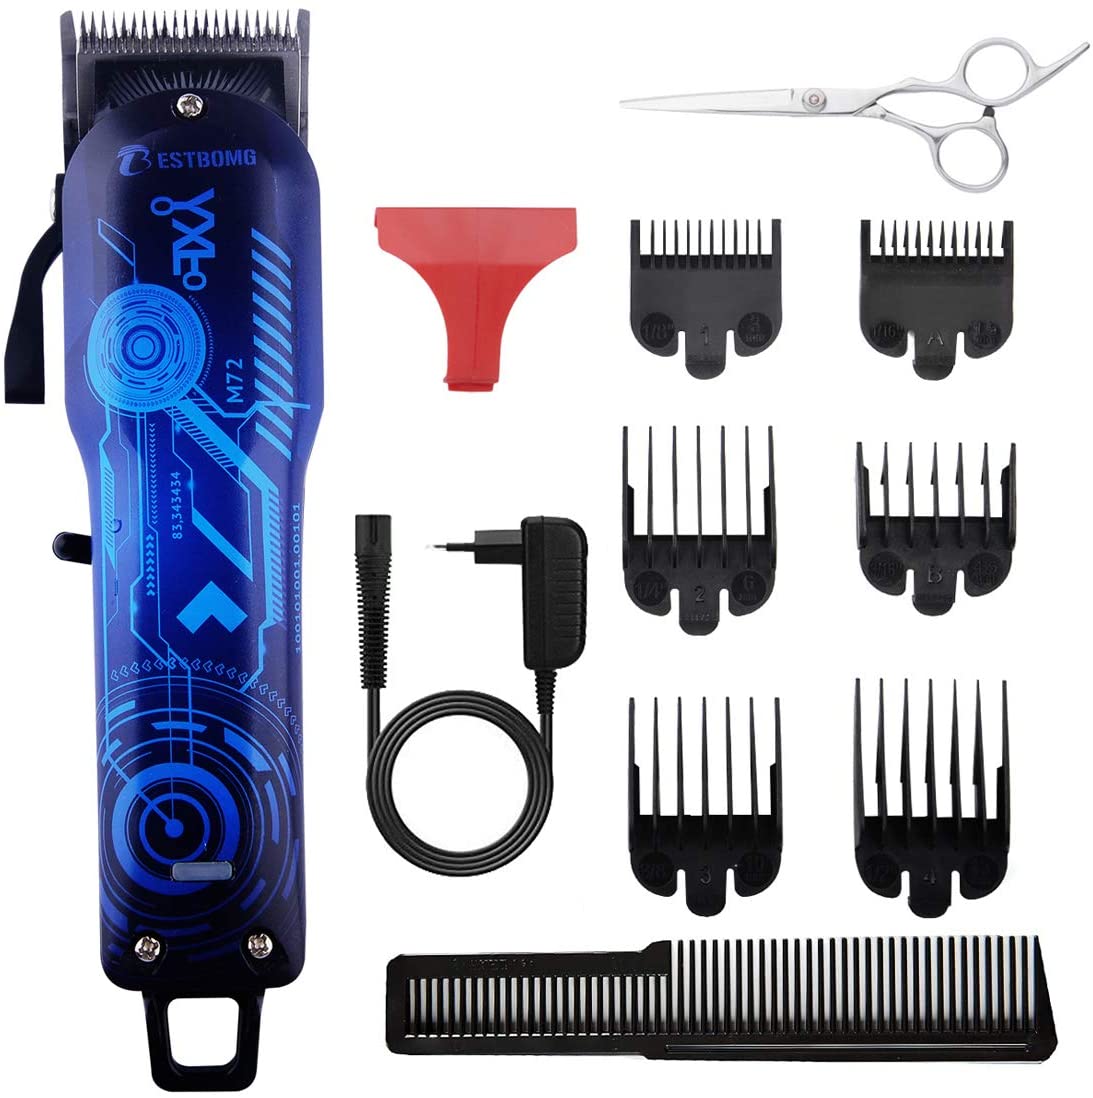 BESTBOMG Professional Hair Trimmer Mens Electric Beard Trimmer Long Hair Trimmer Hair Razor Set Hair Trimmer for Men with LED Display (Motor)